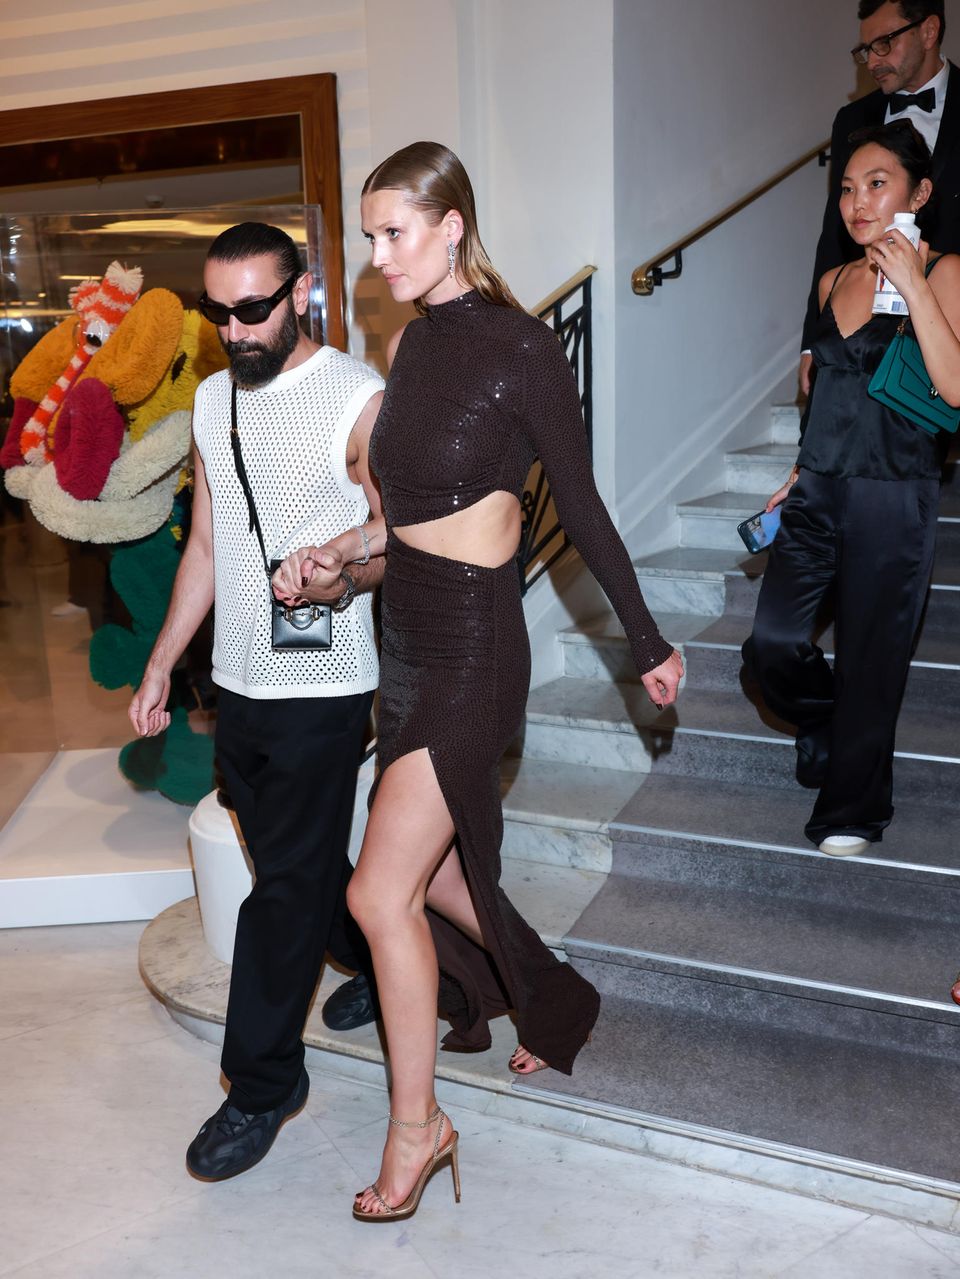 Toni Garrn spotted walking to the red carpet at the Hôtel Martinez.  At her side: celebrity hairstylist Alireza Mousavi